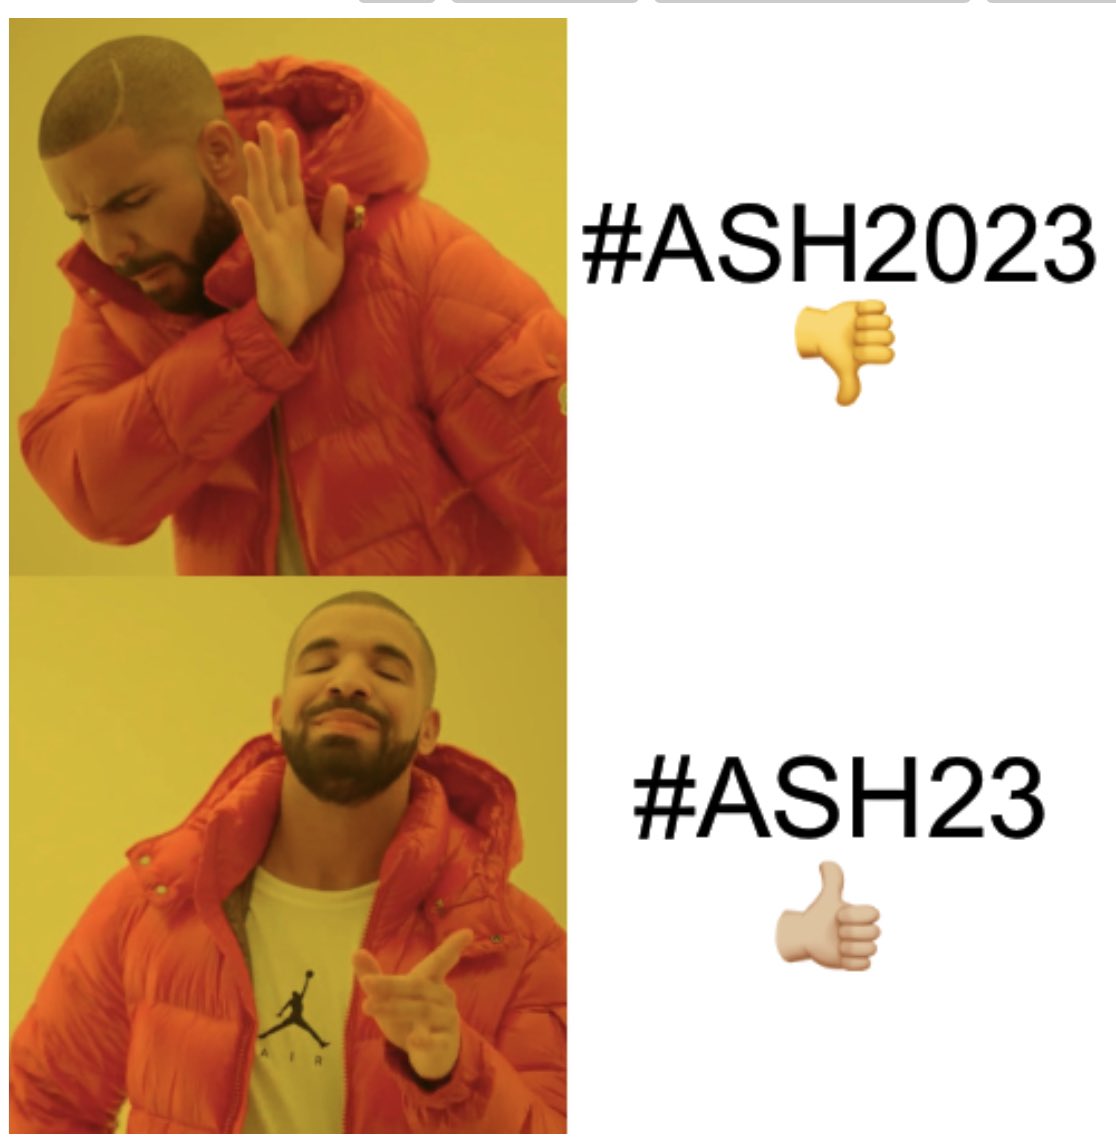 Trying to move on this preemptively - only with all of your help can we finally have a unified hashtag for #ASH23! See meme and official @ASH_hematology reply below: See you all in San Diego!